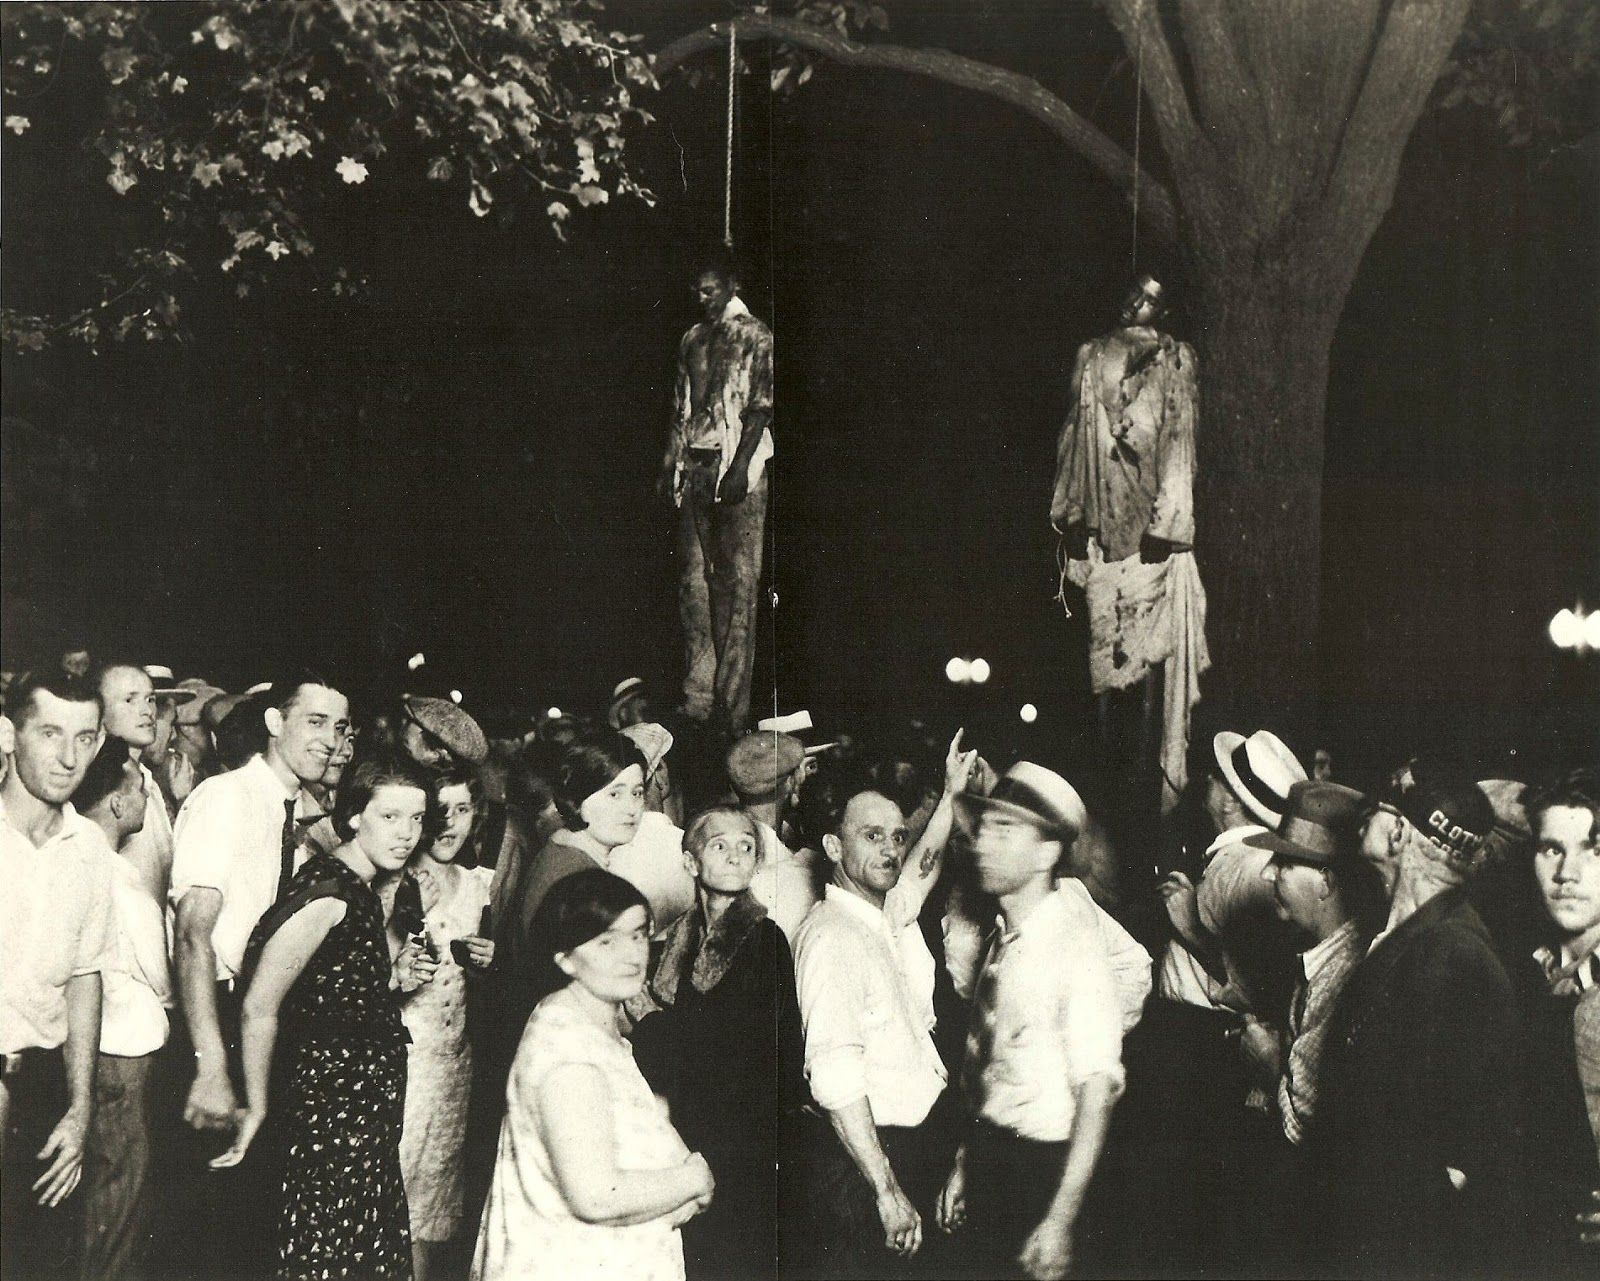 Two black men are hung from trees, surrounded by a white crowd